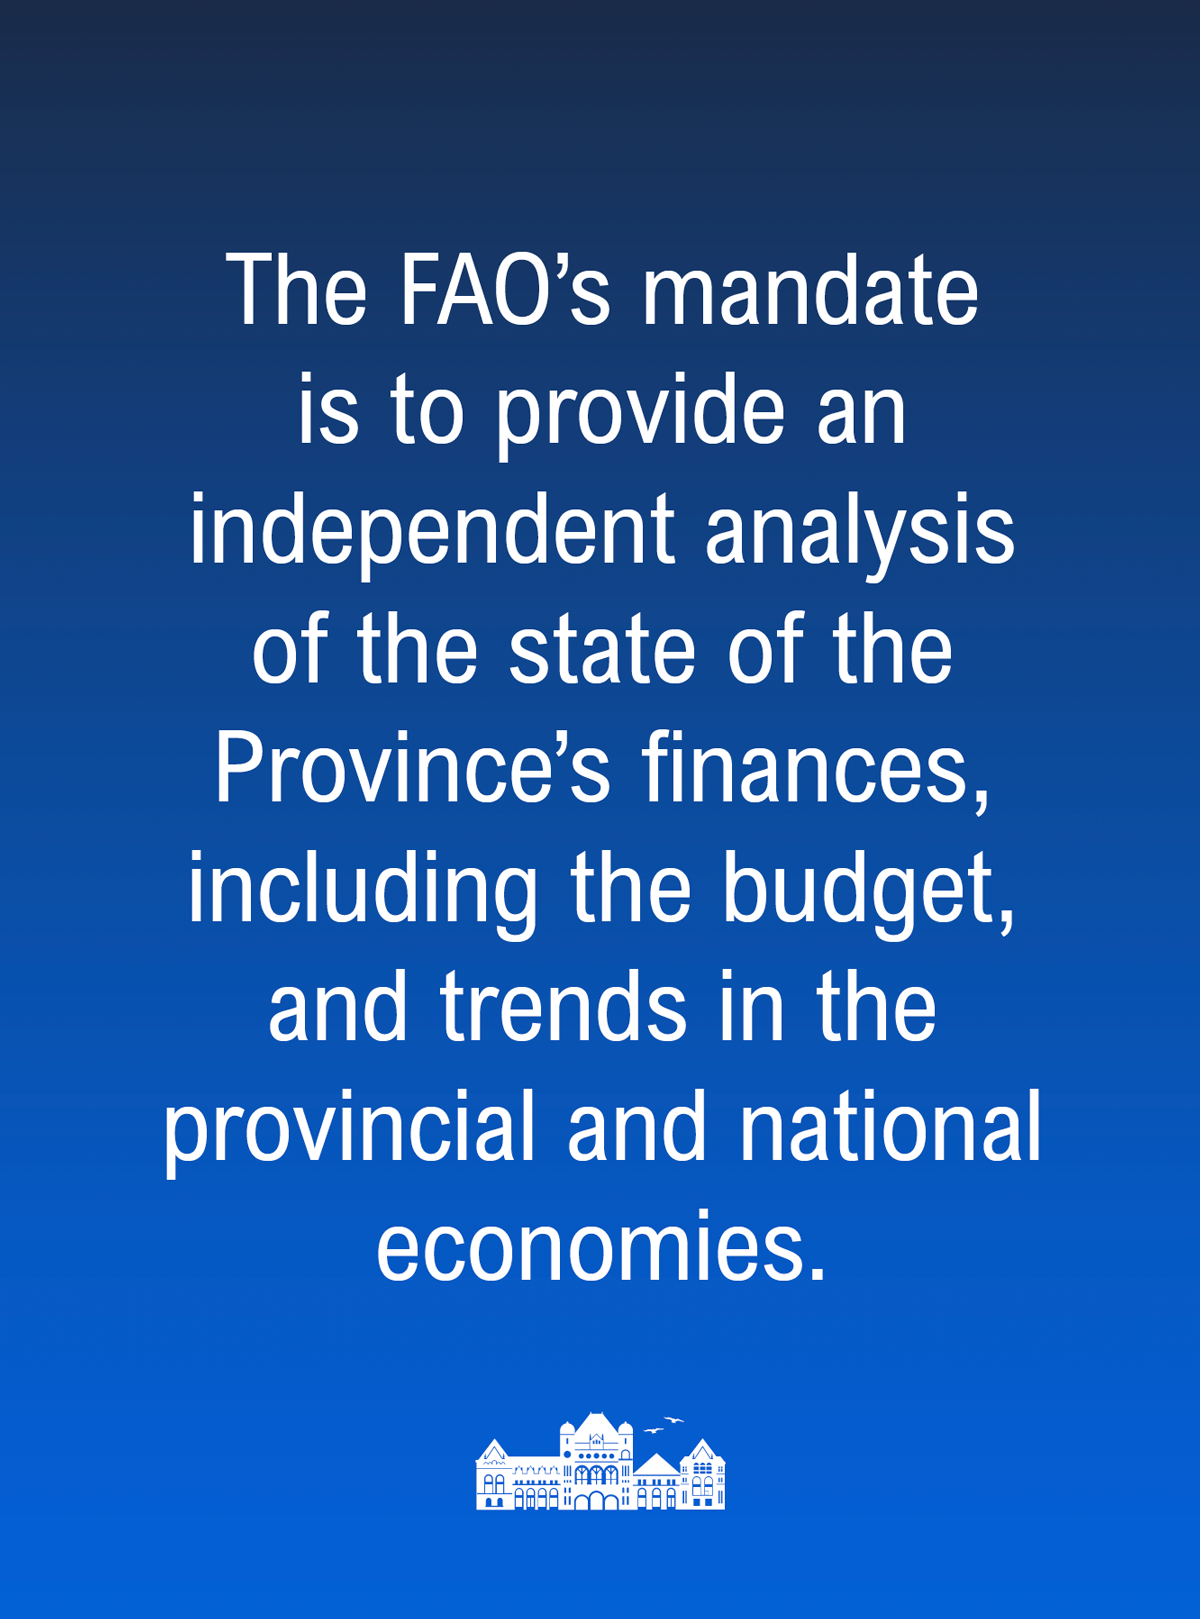 The Financial Accountability Officer’s mandate is to provide an independent analysis of the state of the Province’s finances, including the budget, and trends in the provincial and national economies.